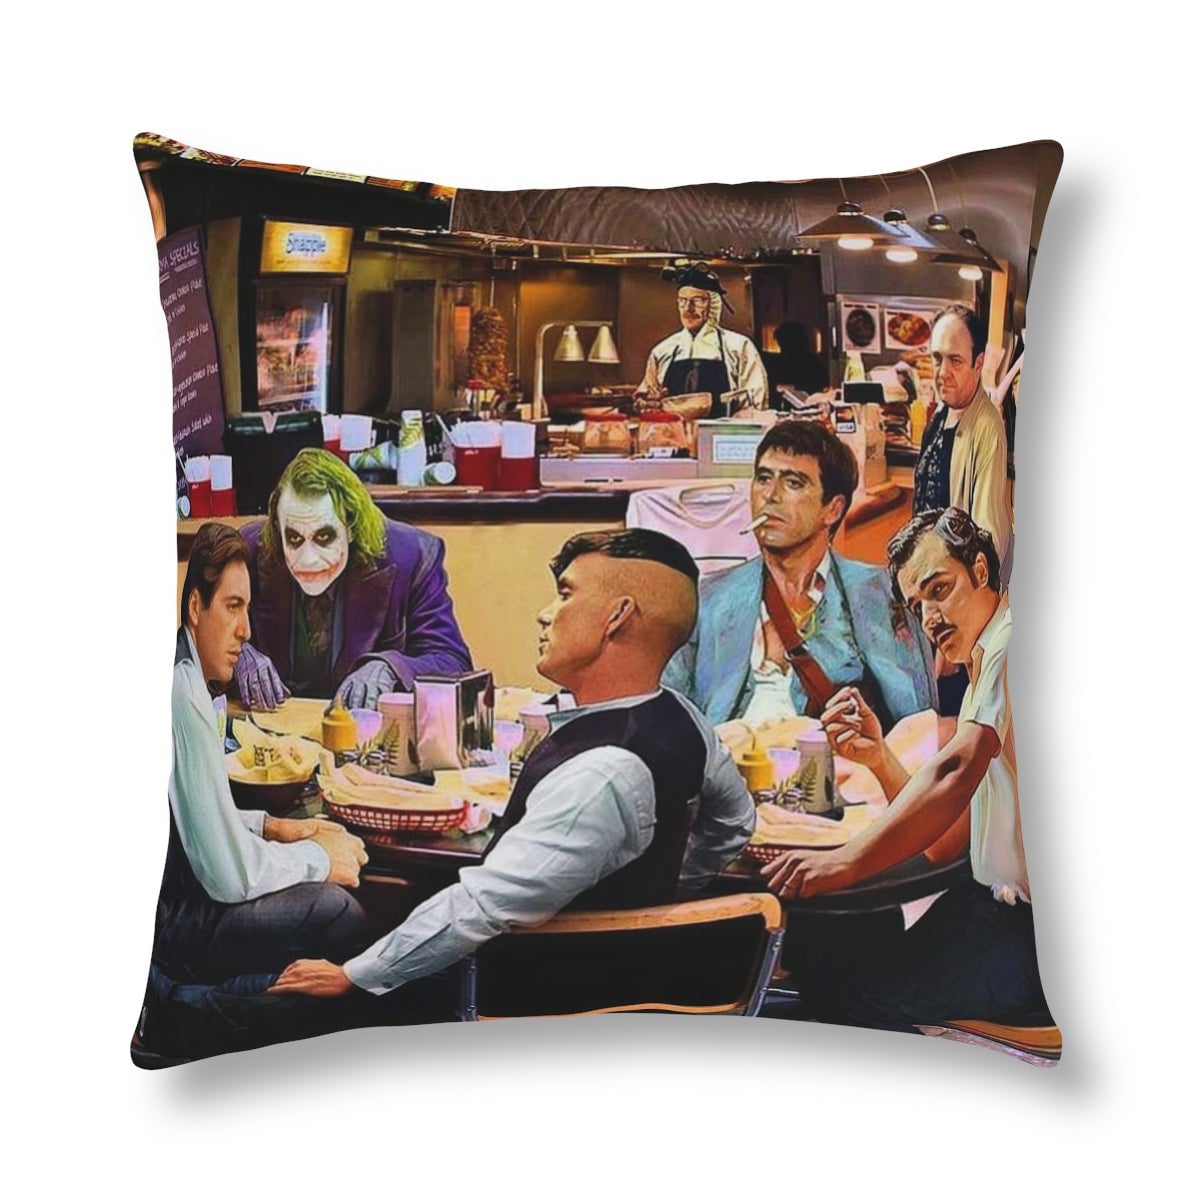 The Best Famous Mobster Movies of All Time Waterproof Pillows